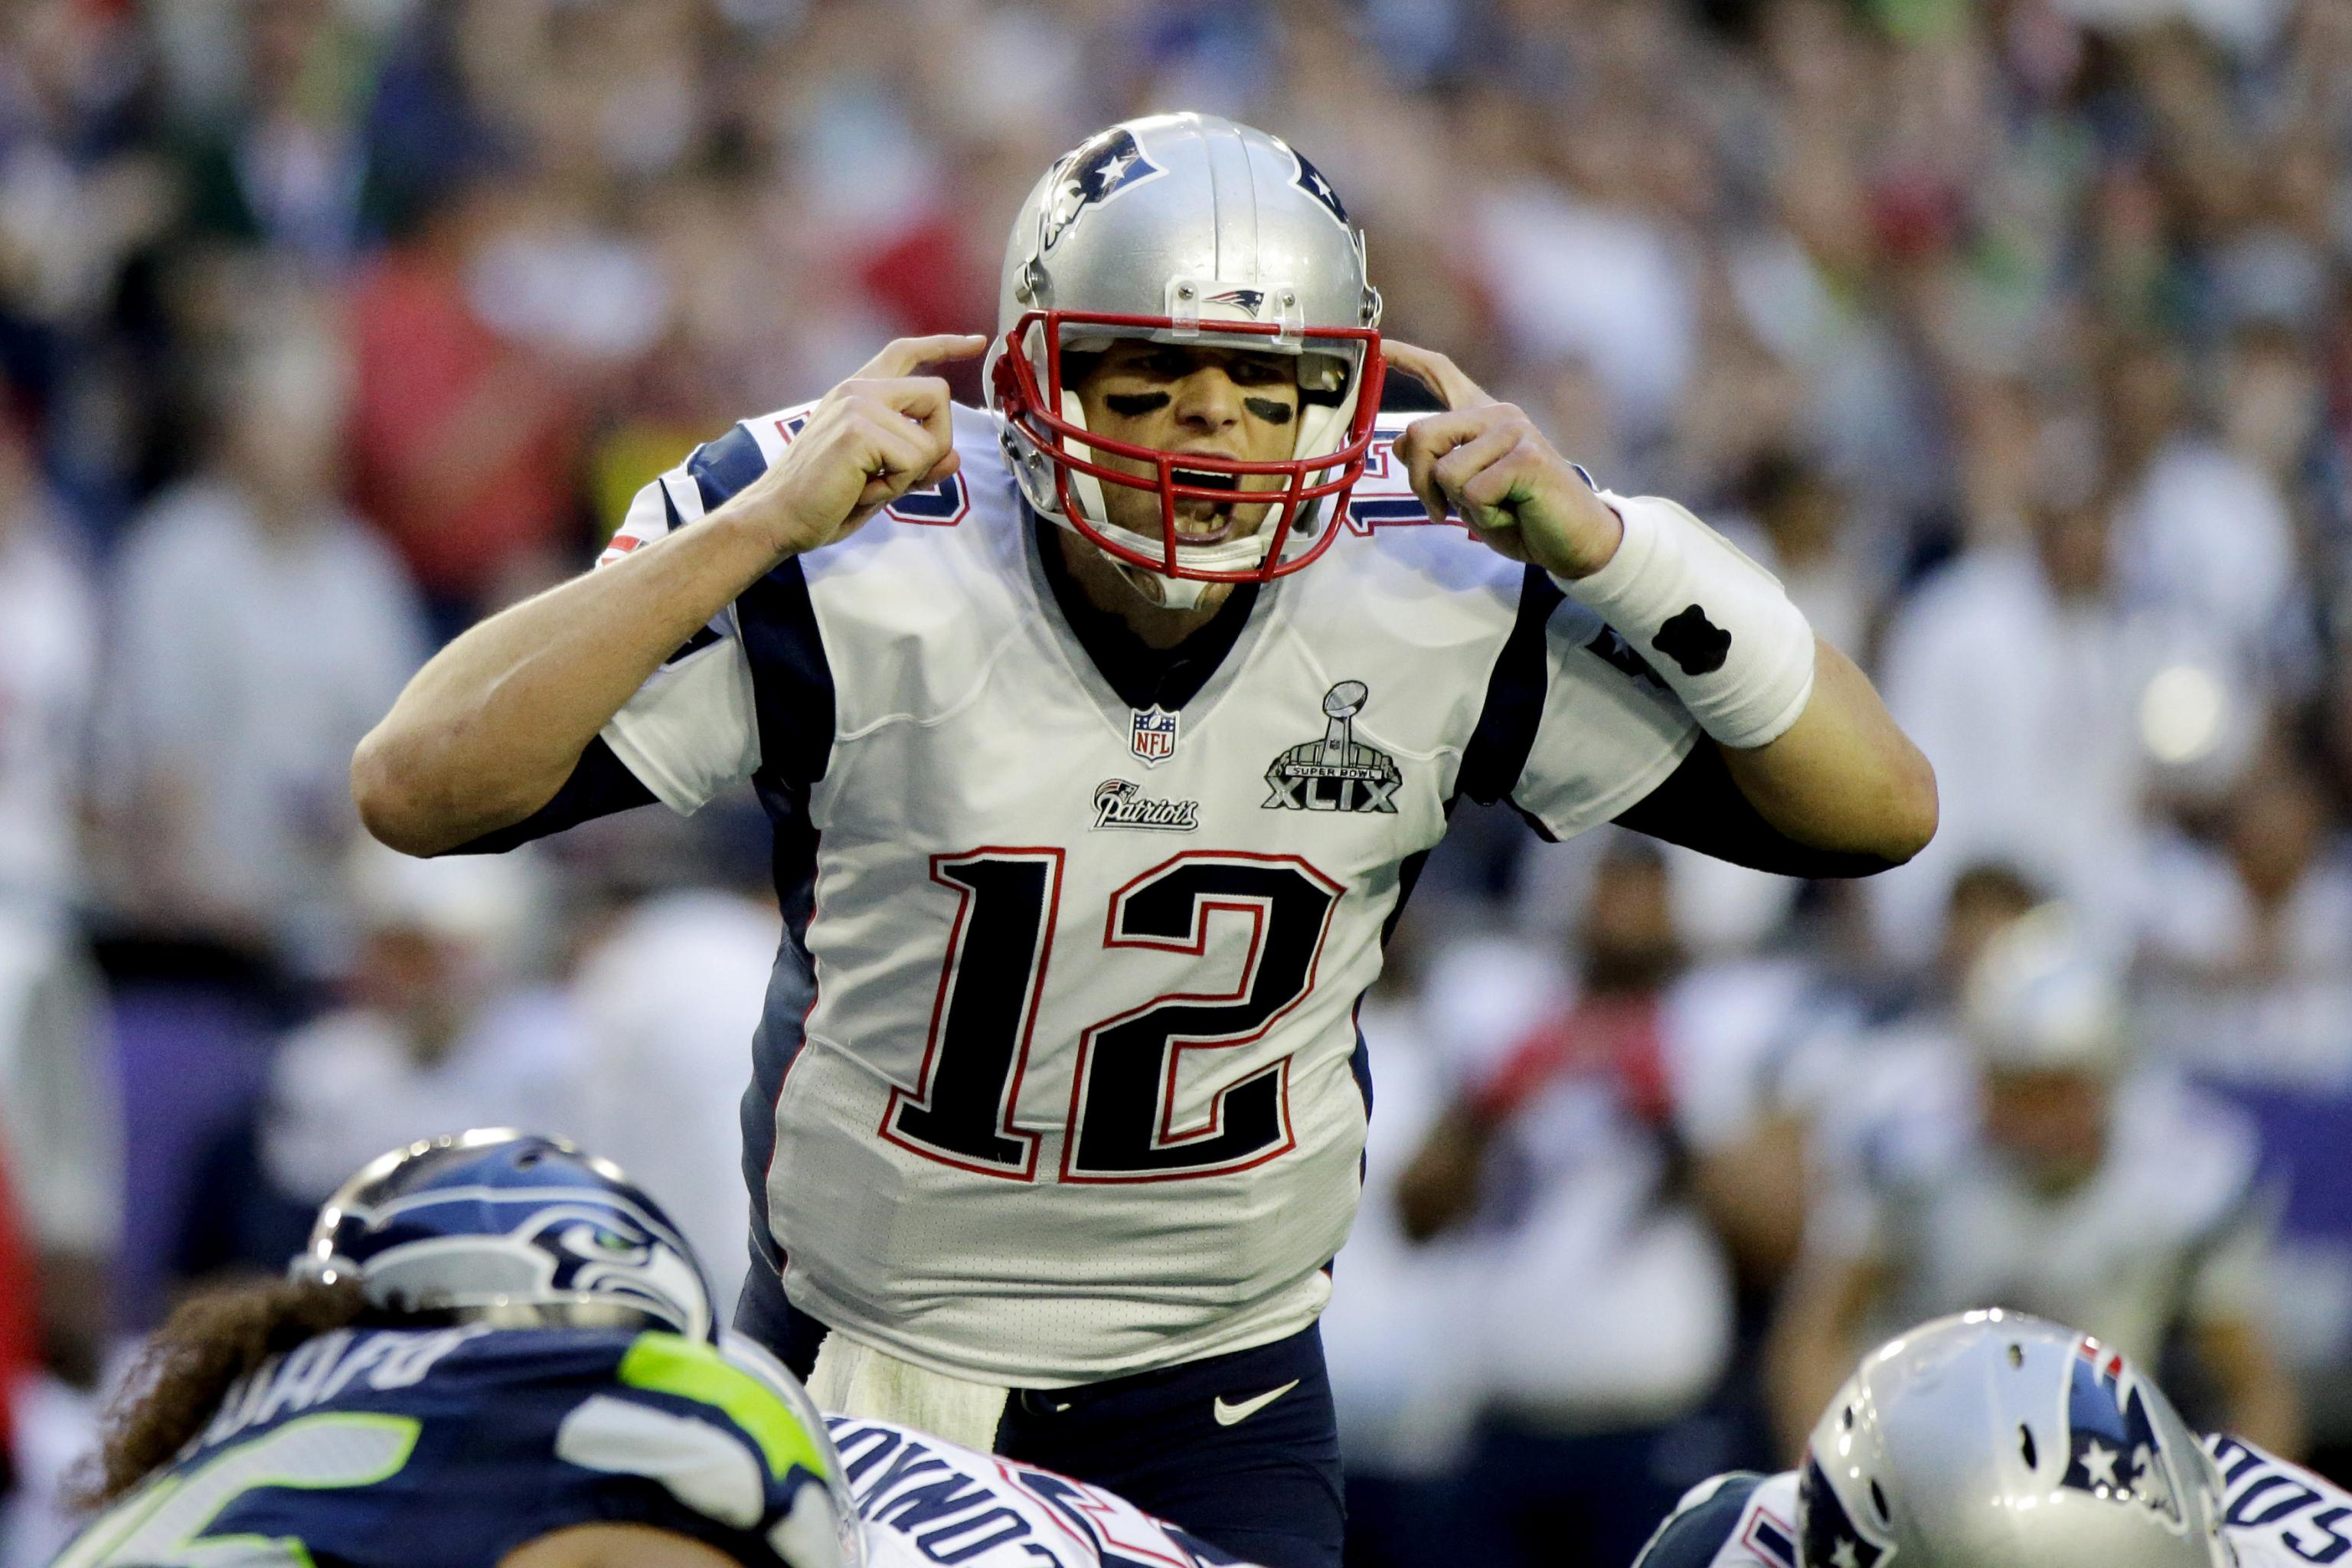 Super Bowl 2015 Patriots overtake Seahawks to reign as Super Bowl champions  - CBS News